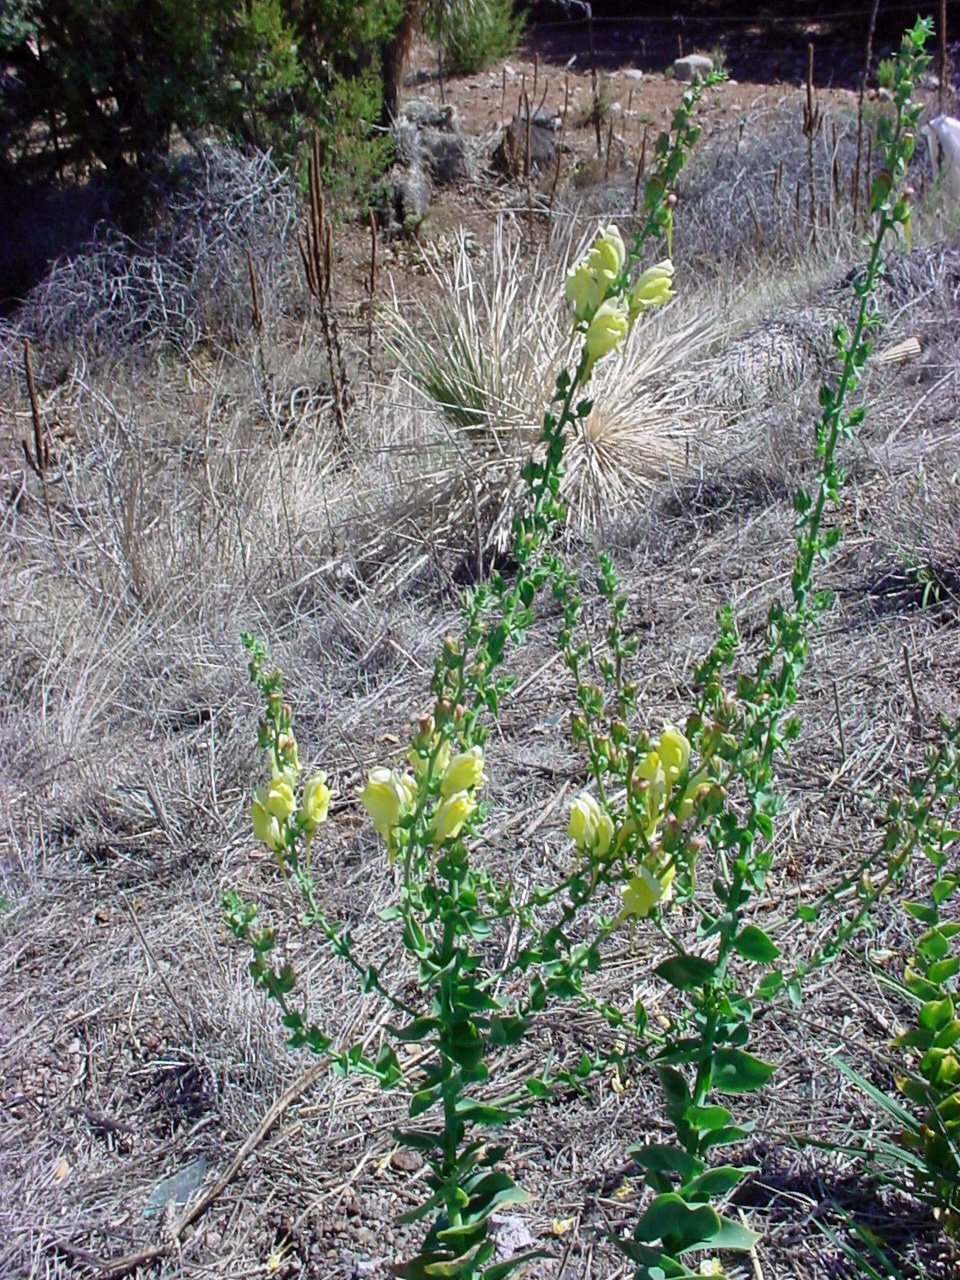 Plants growing in a dry, scrubby habitat and displaying erect flower stalks